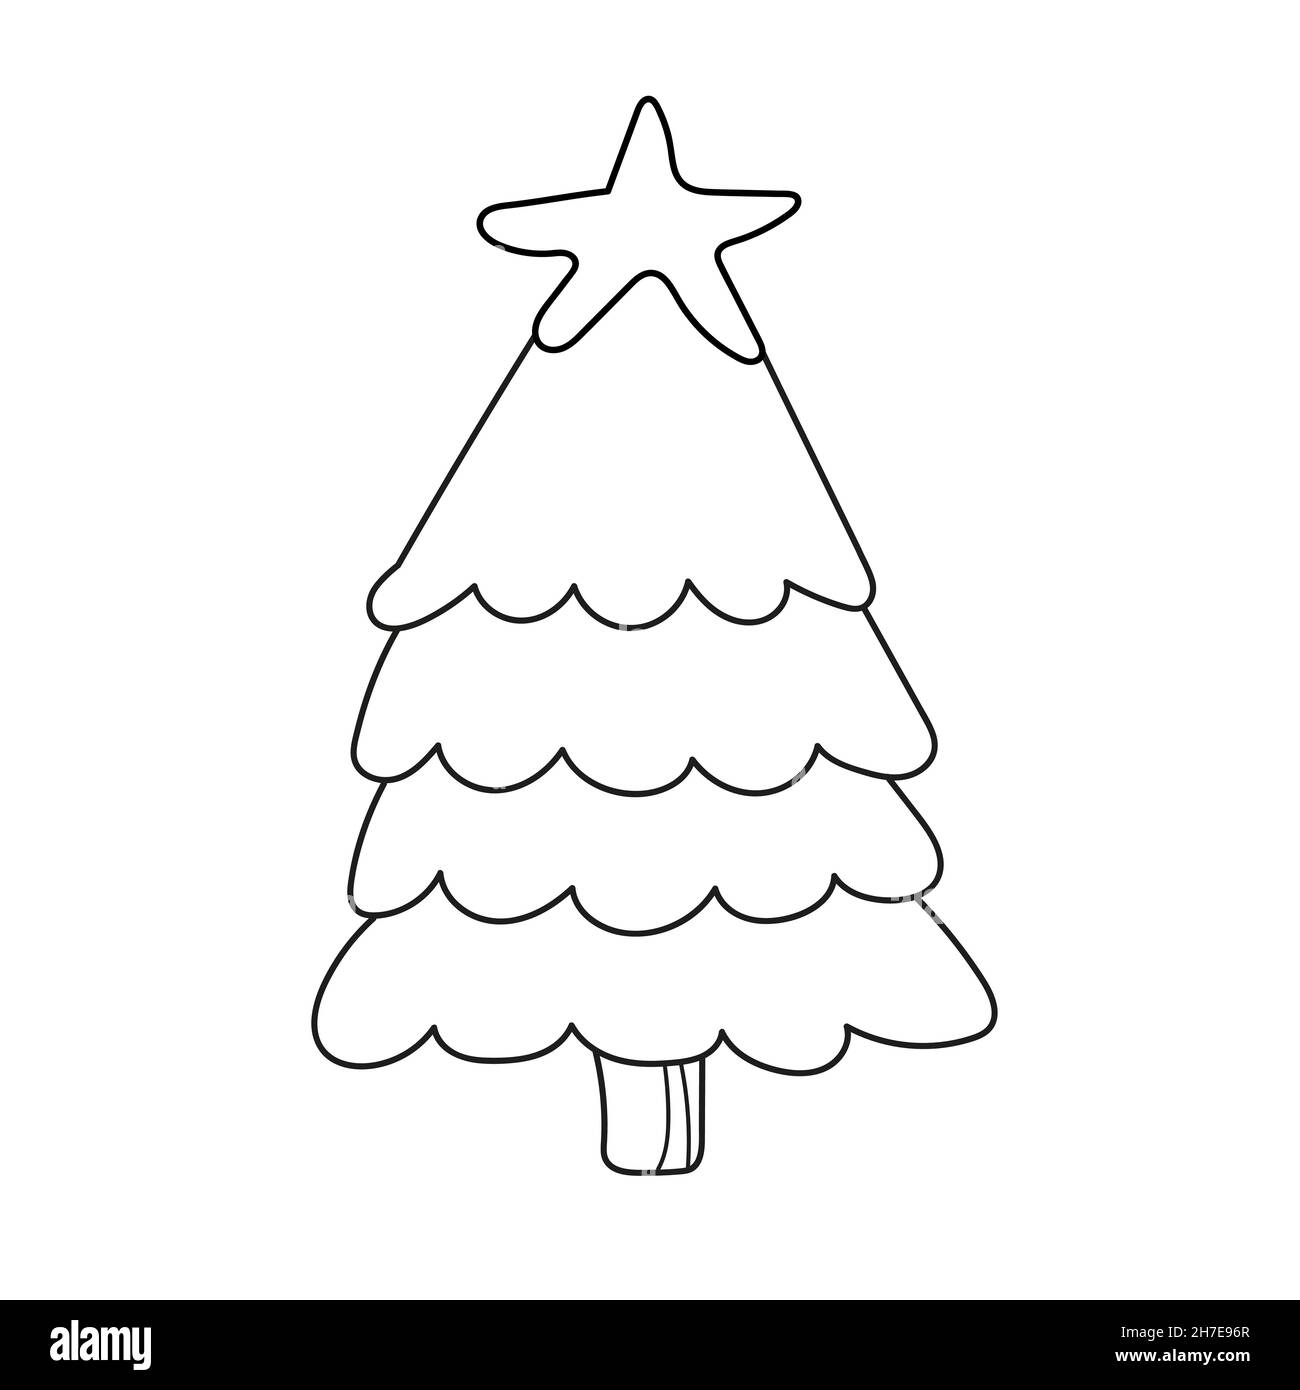 Simple coloring page. New Year Tree to be colored, the coloring book for preschool kids with easy educational gaming level. Stock Vector